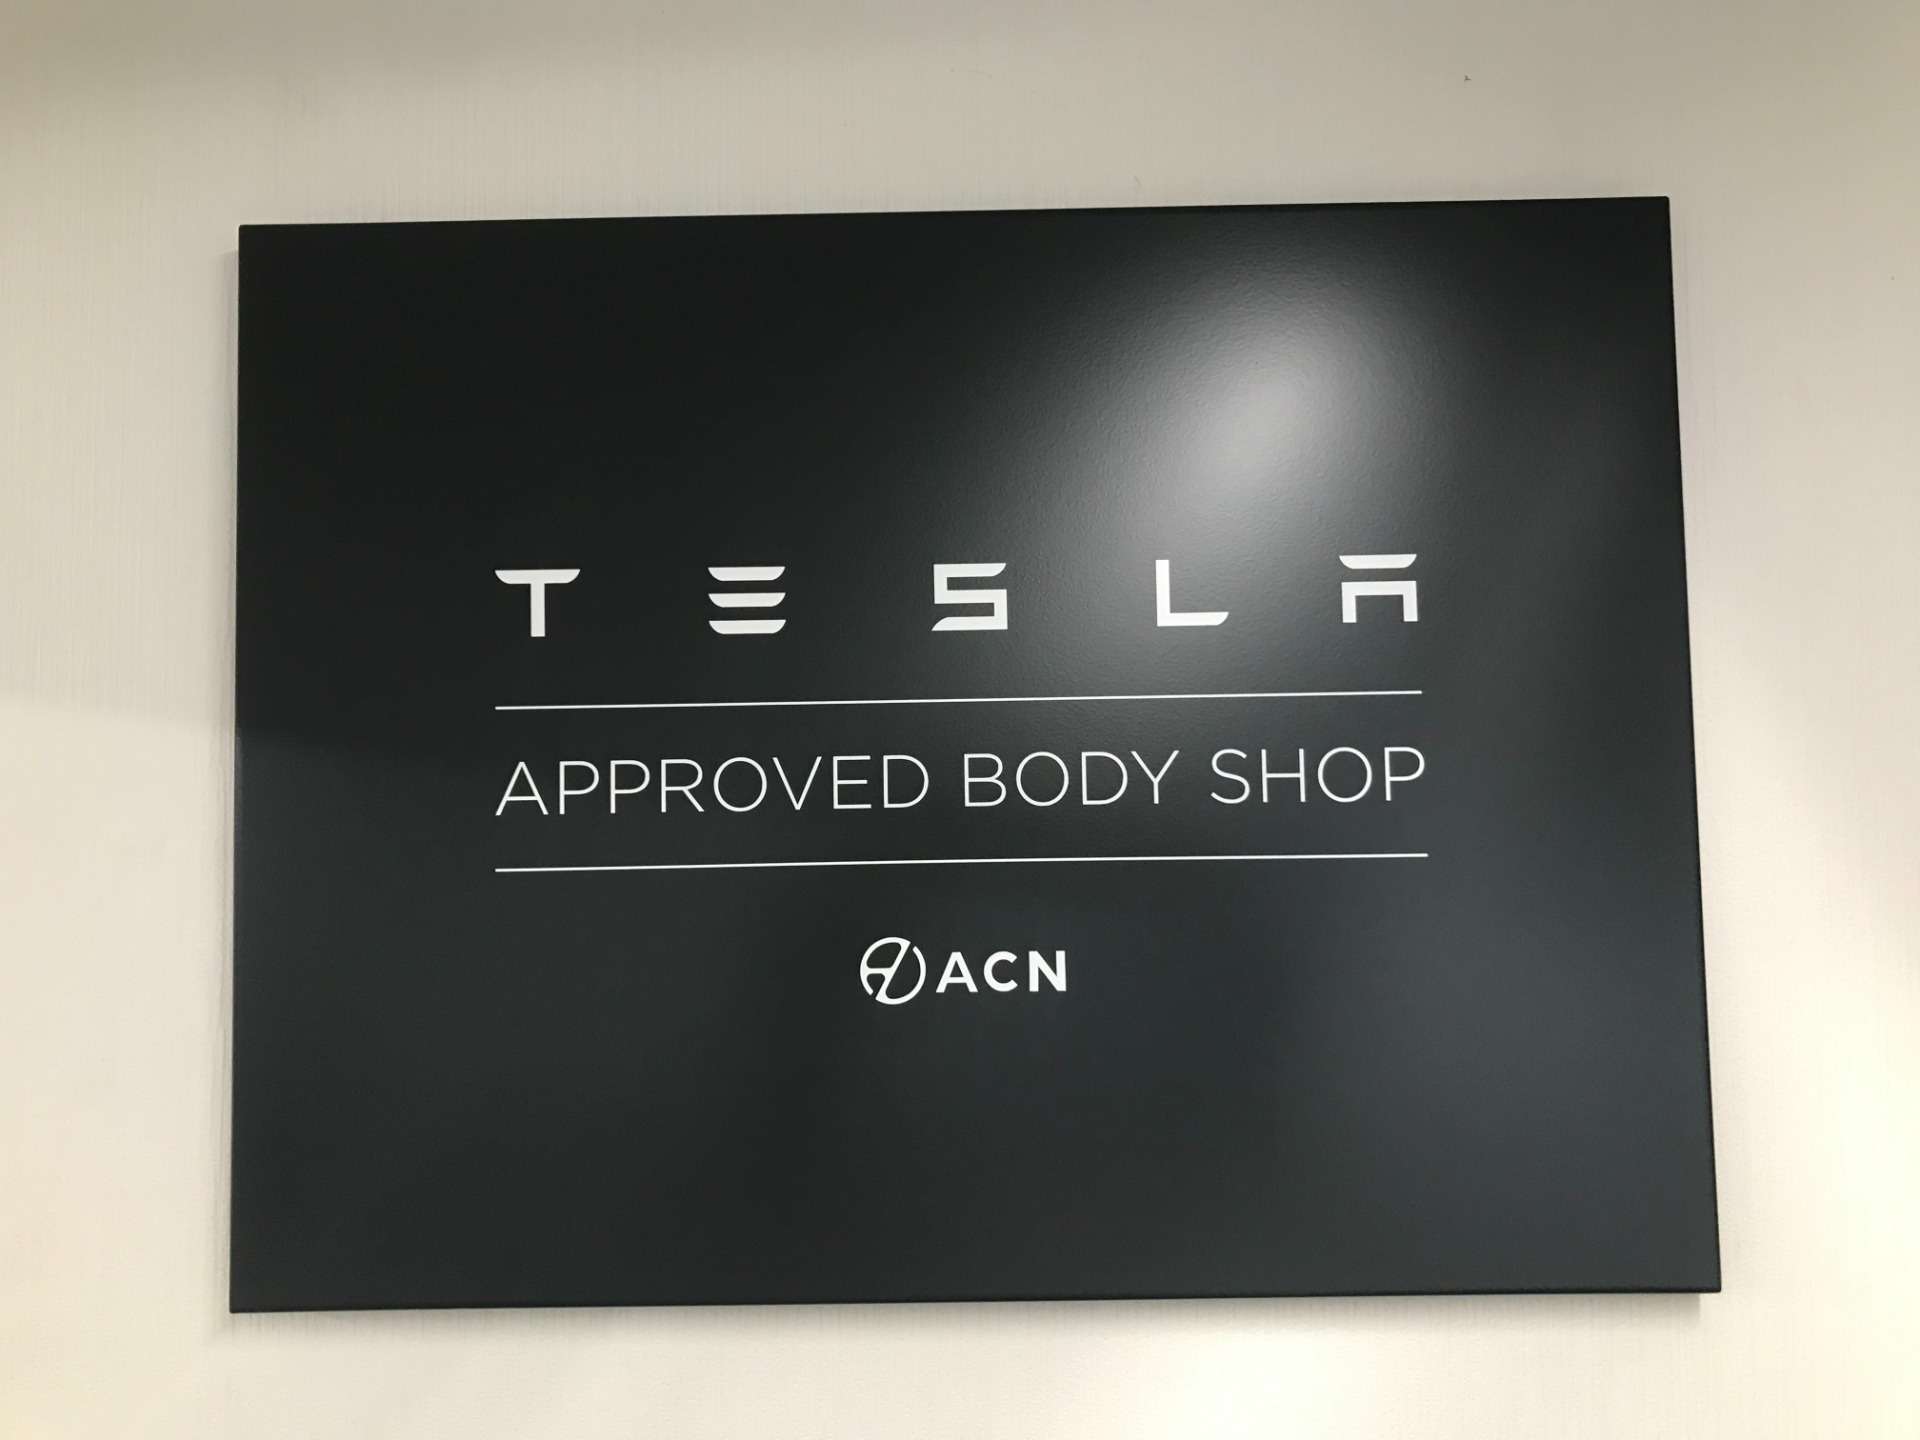 【Tesra Approved Body Shop】から12ヶ月点検のご案内